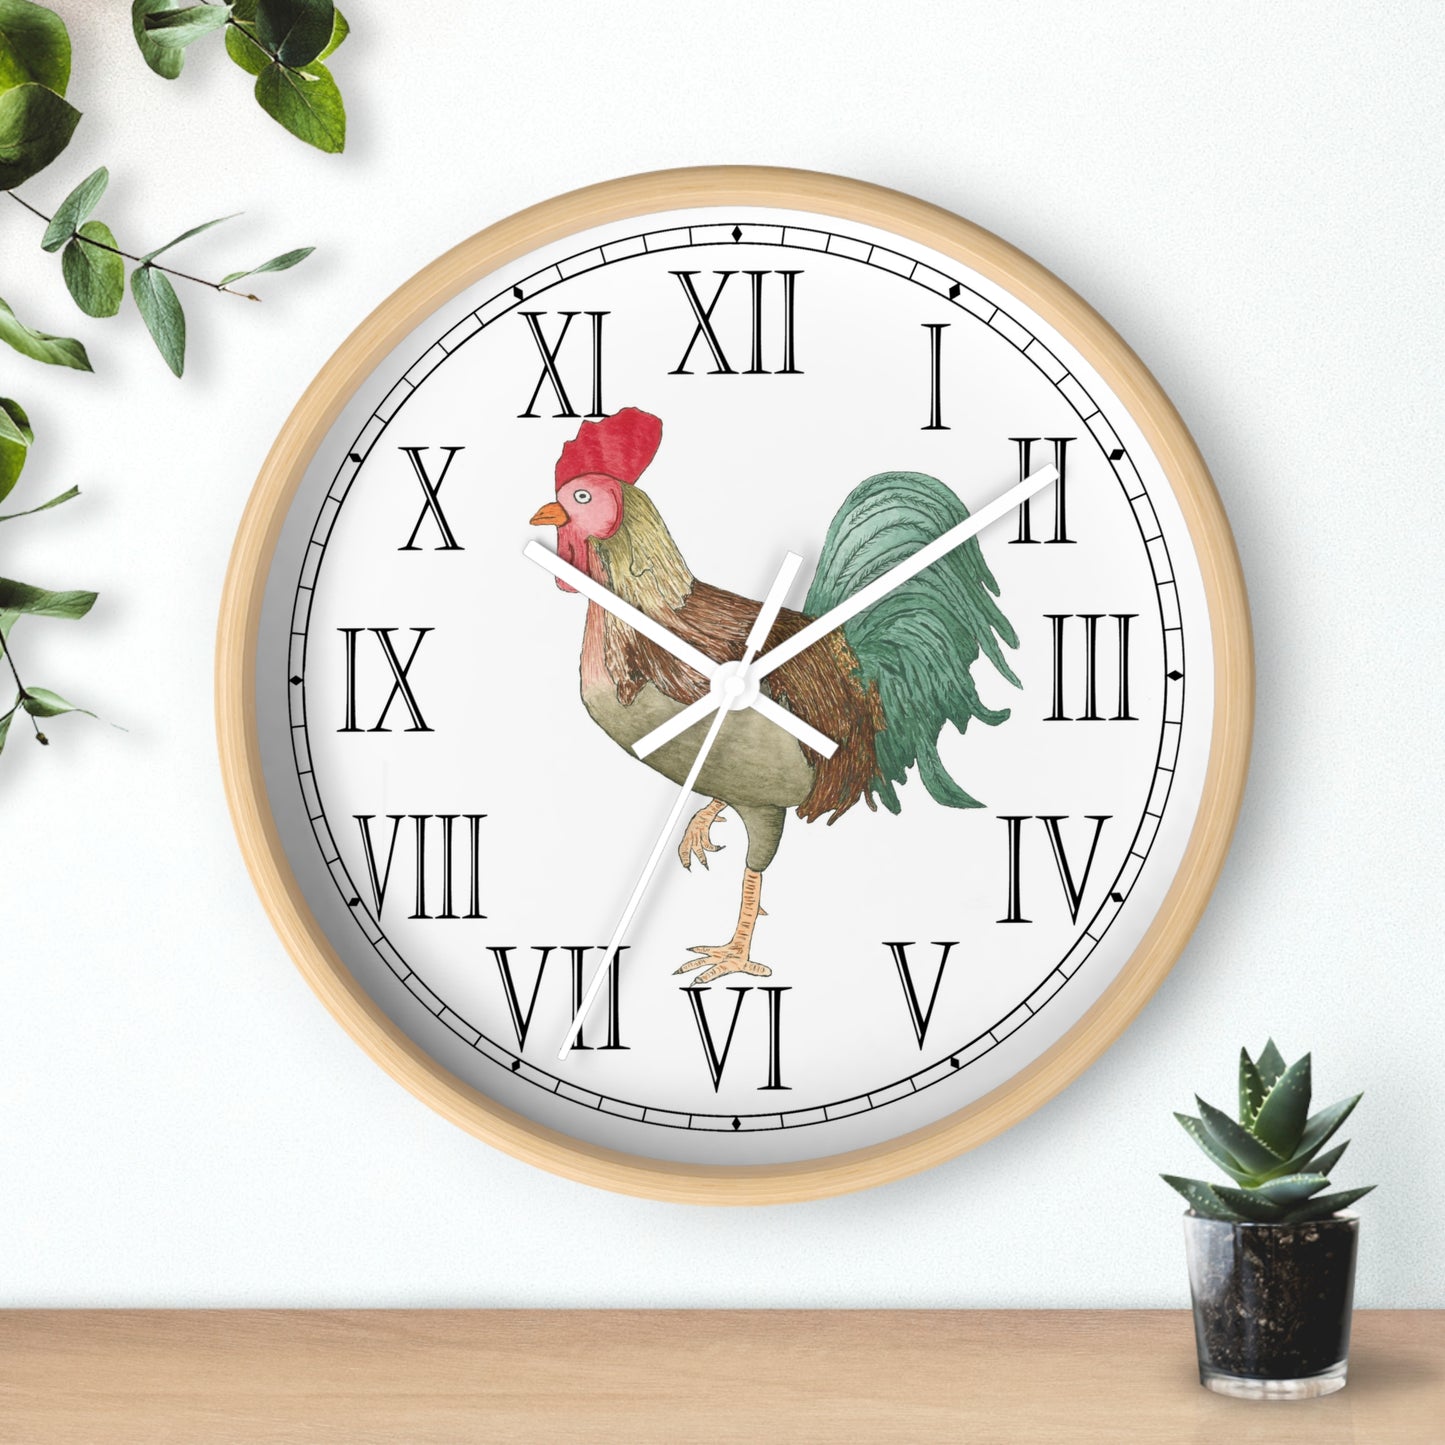 Michael Rooster Roman Numeral Clock